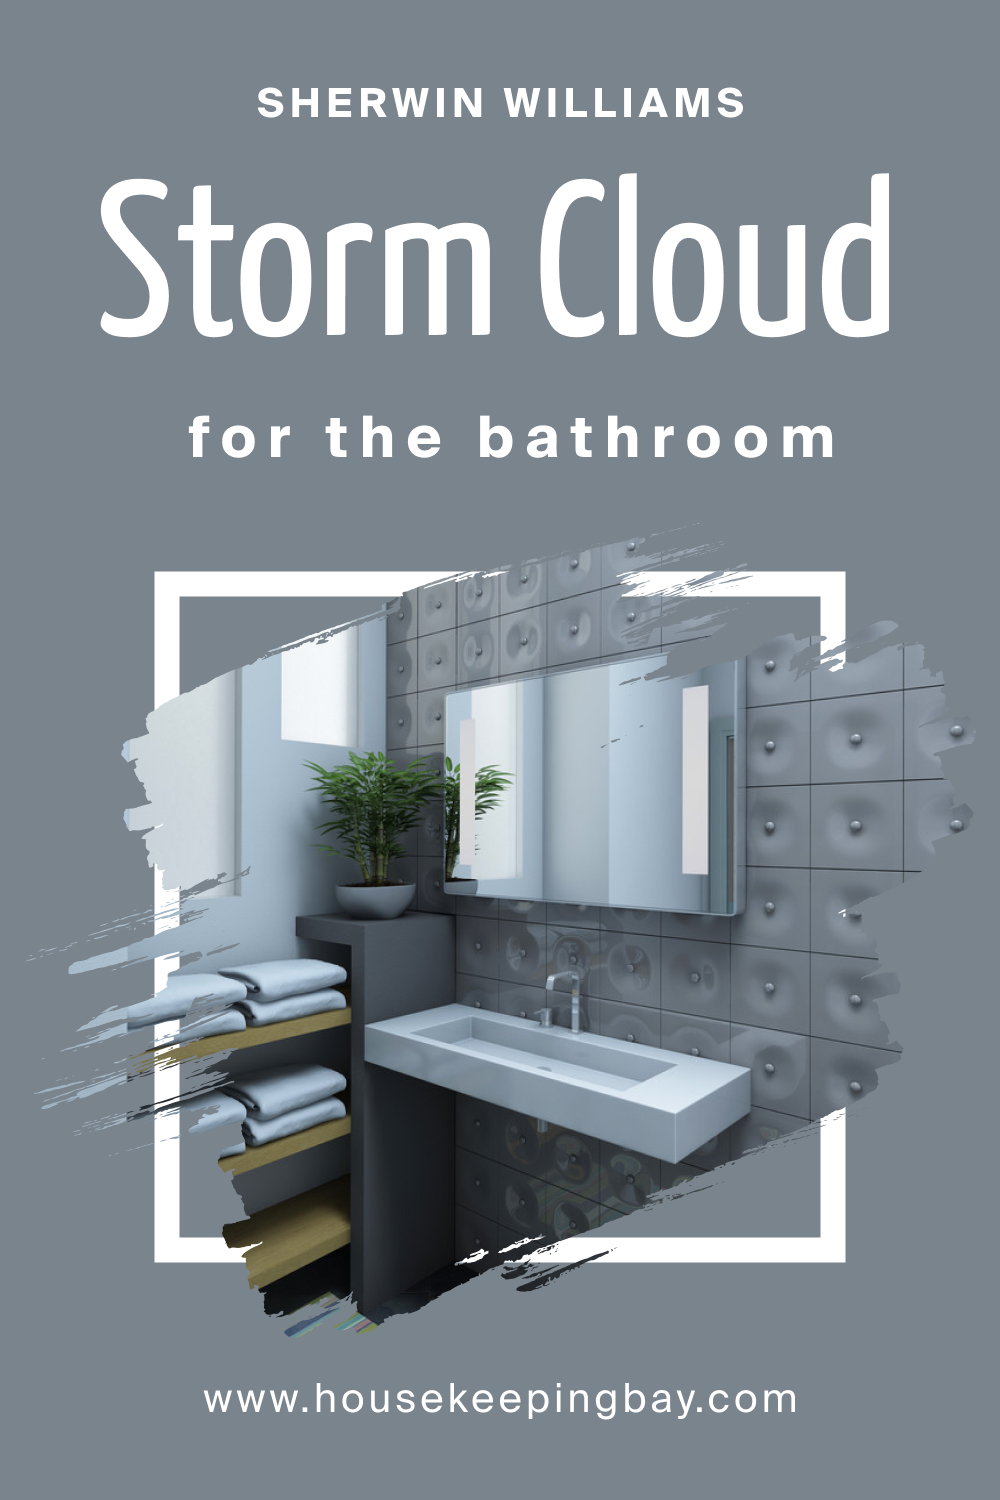 Sherwin Williams. SW 6249 Storm Cloud For the Bathroom